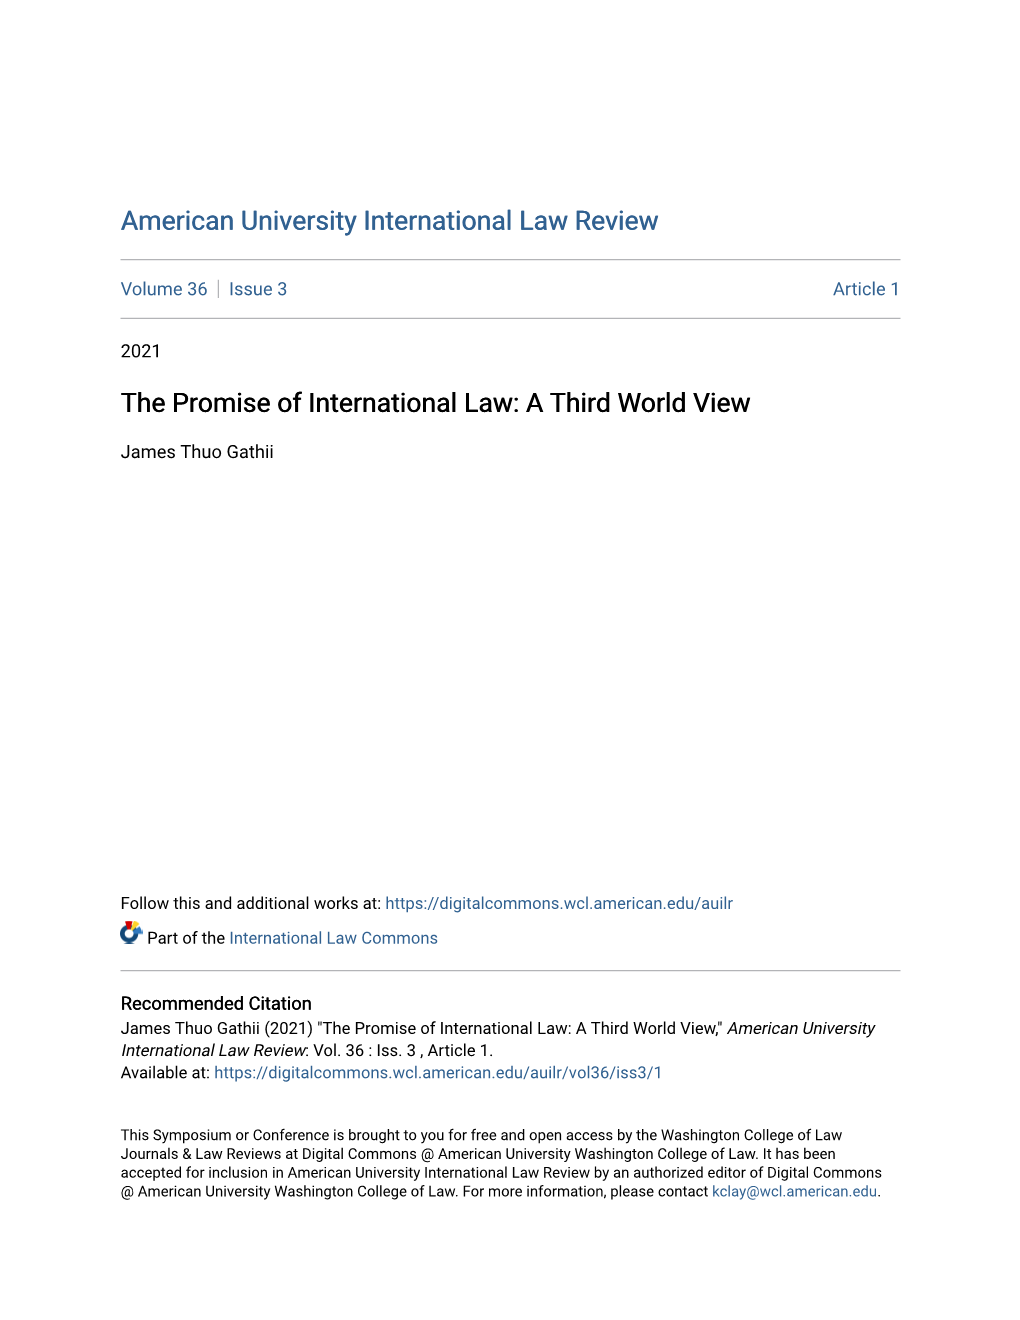 The Promise of International Law: a Third World View